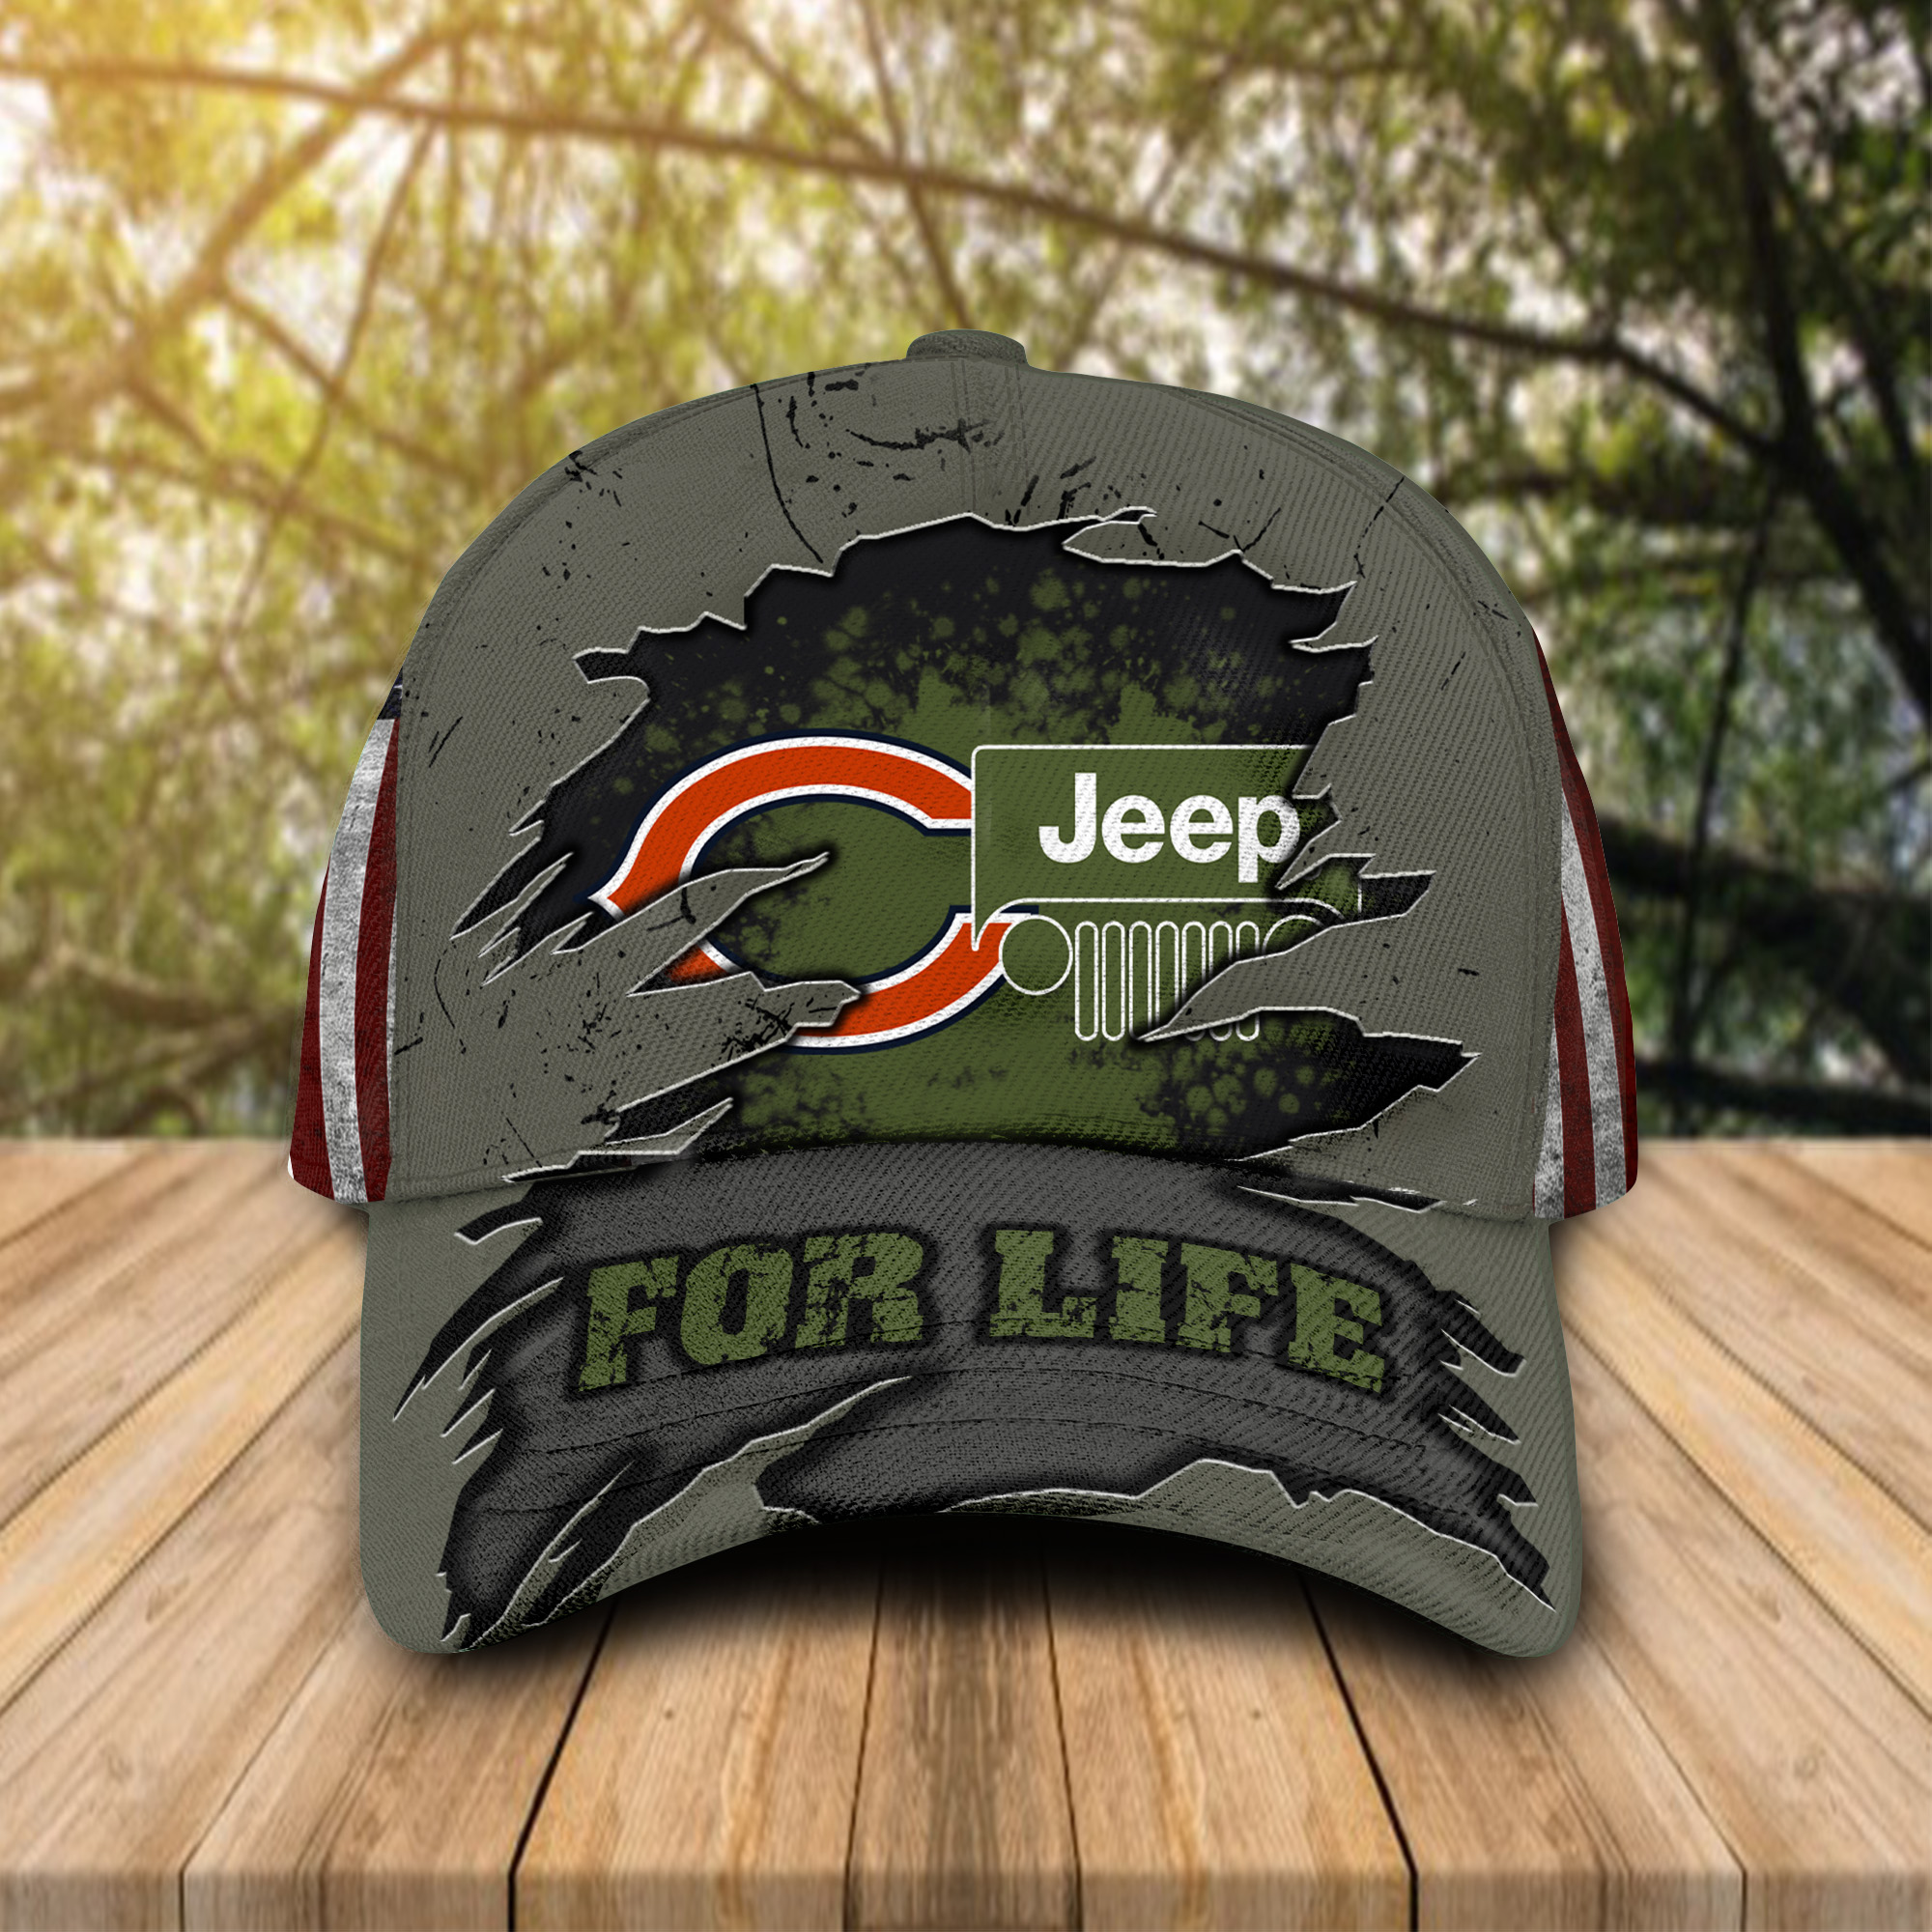 Chicago Bears Jeep for life cap hat 2